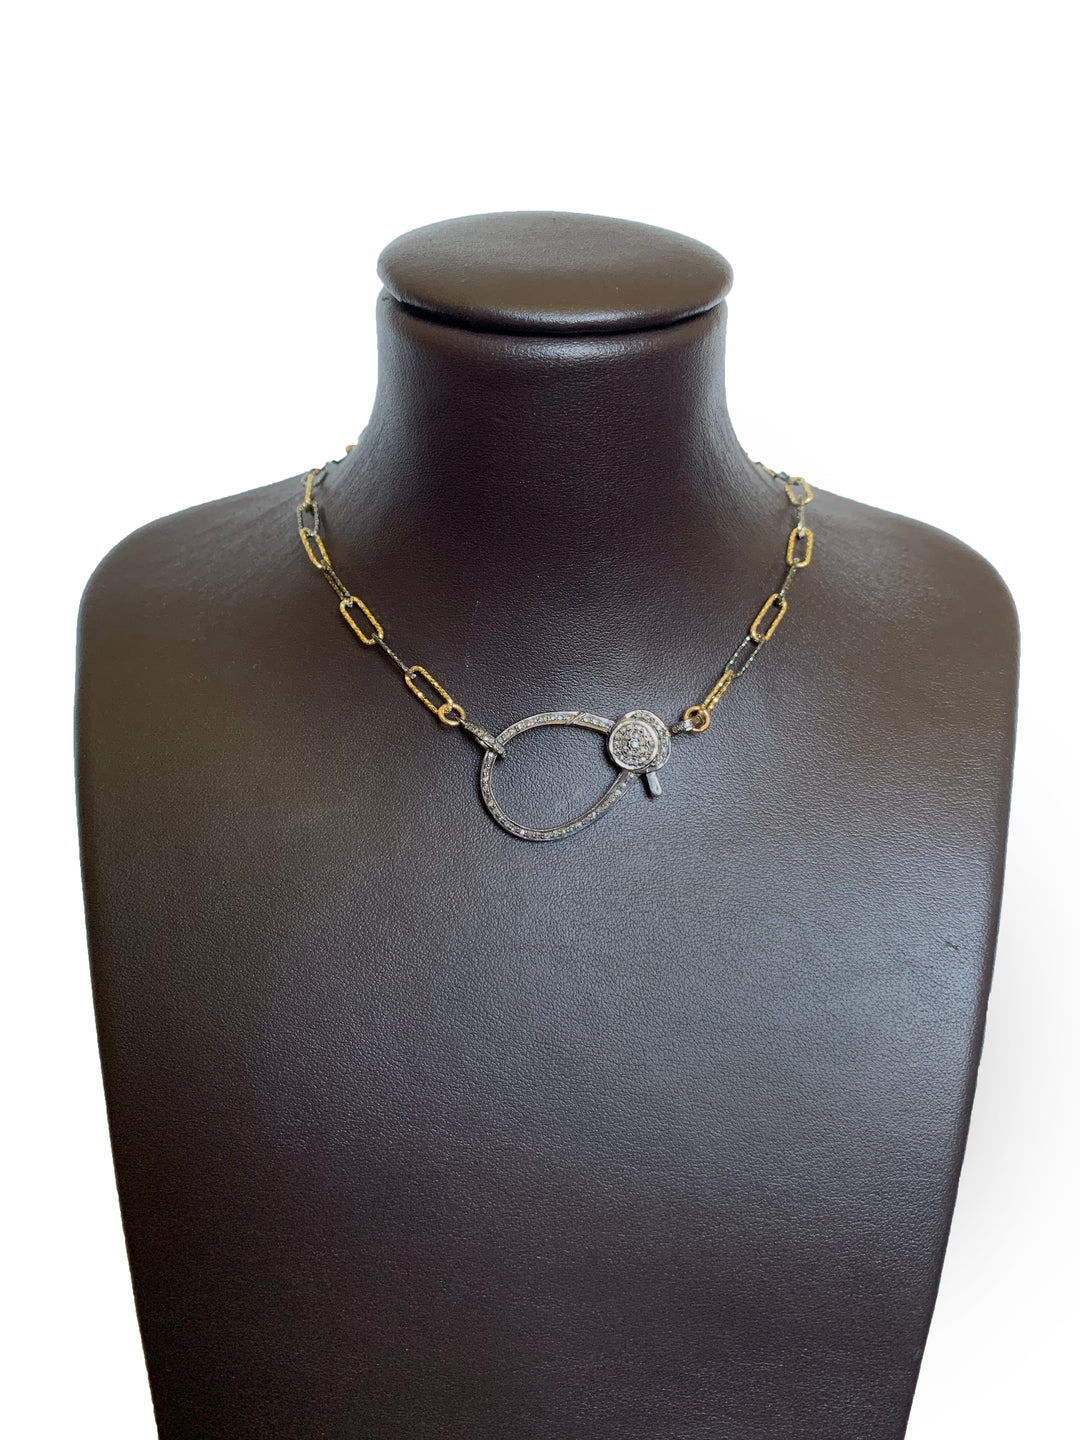 Oversize Gold & Silver Chain Necklace - Kingfisher Road - Online Boutique